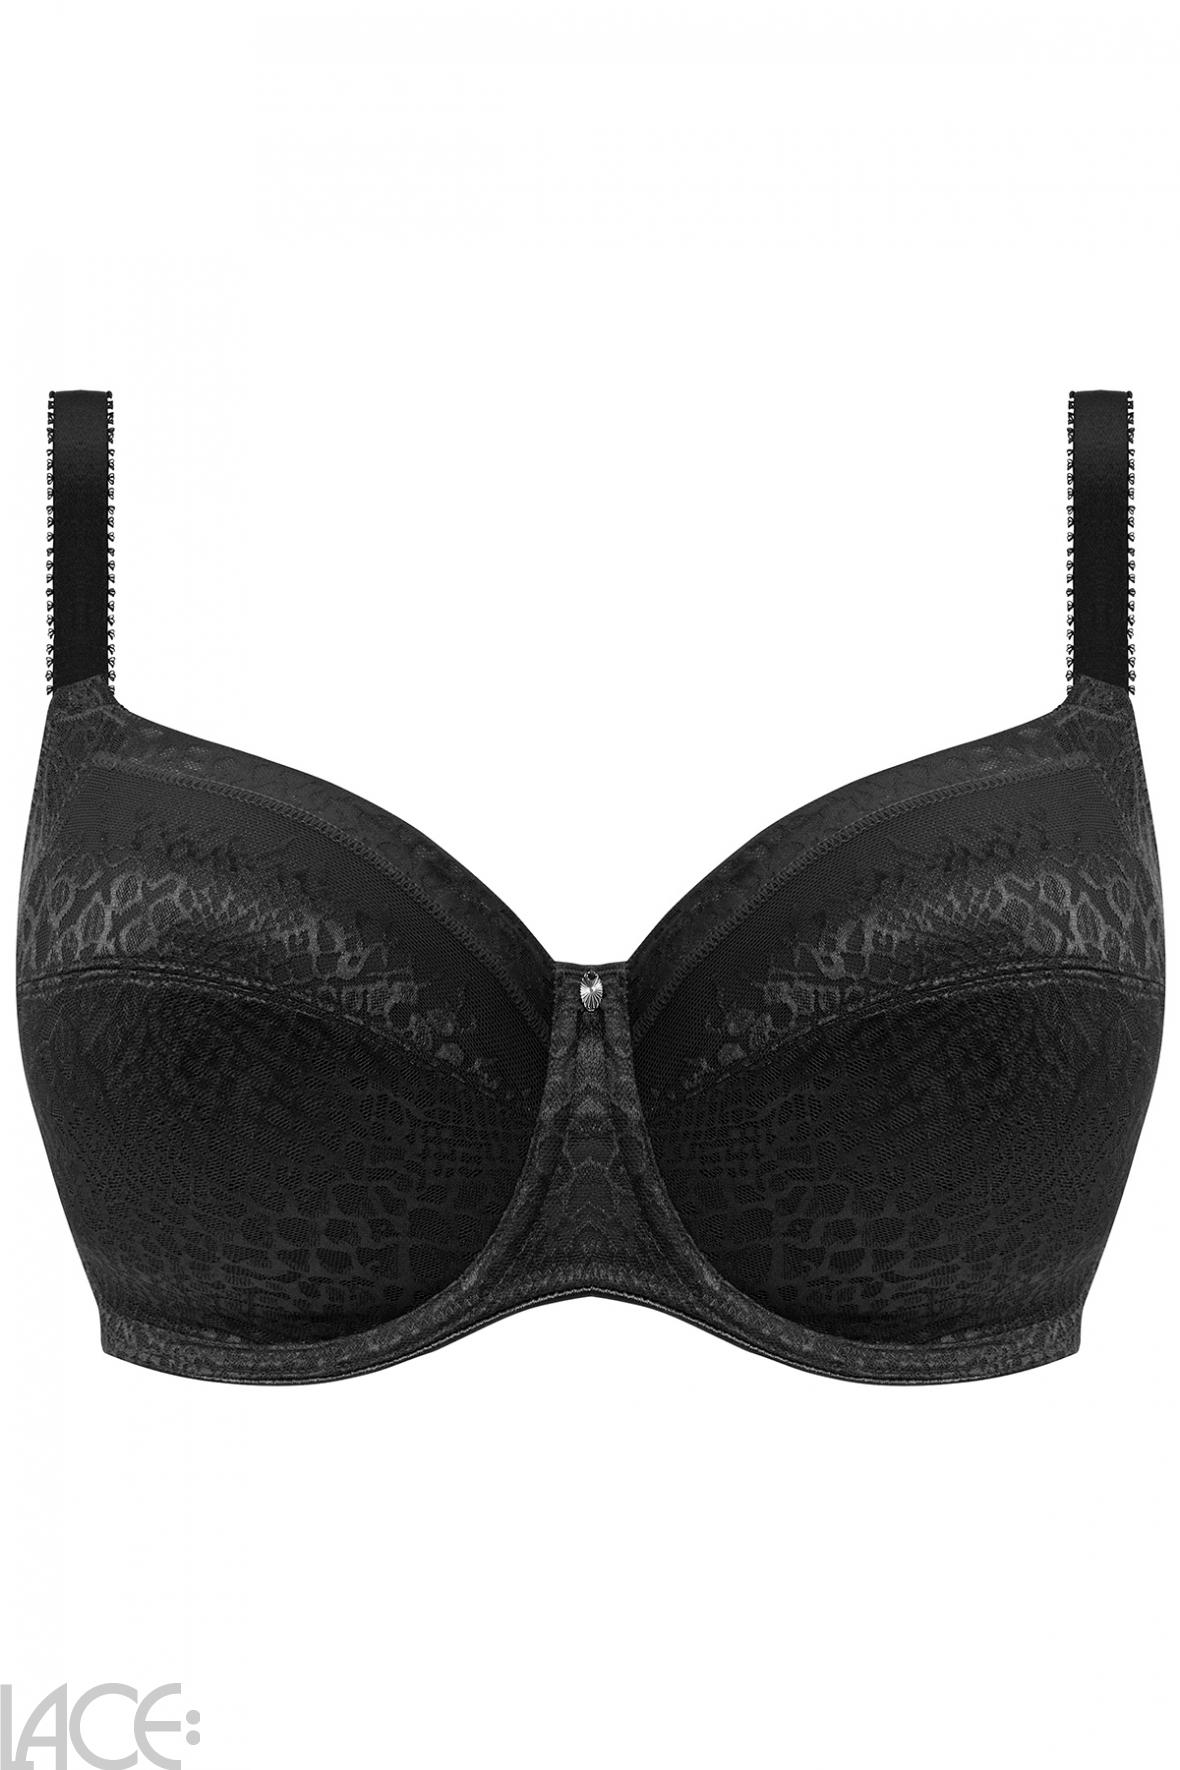 Plum Envisage Full Cup Side Support Bra - BrandAlley